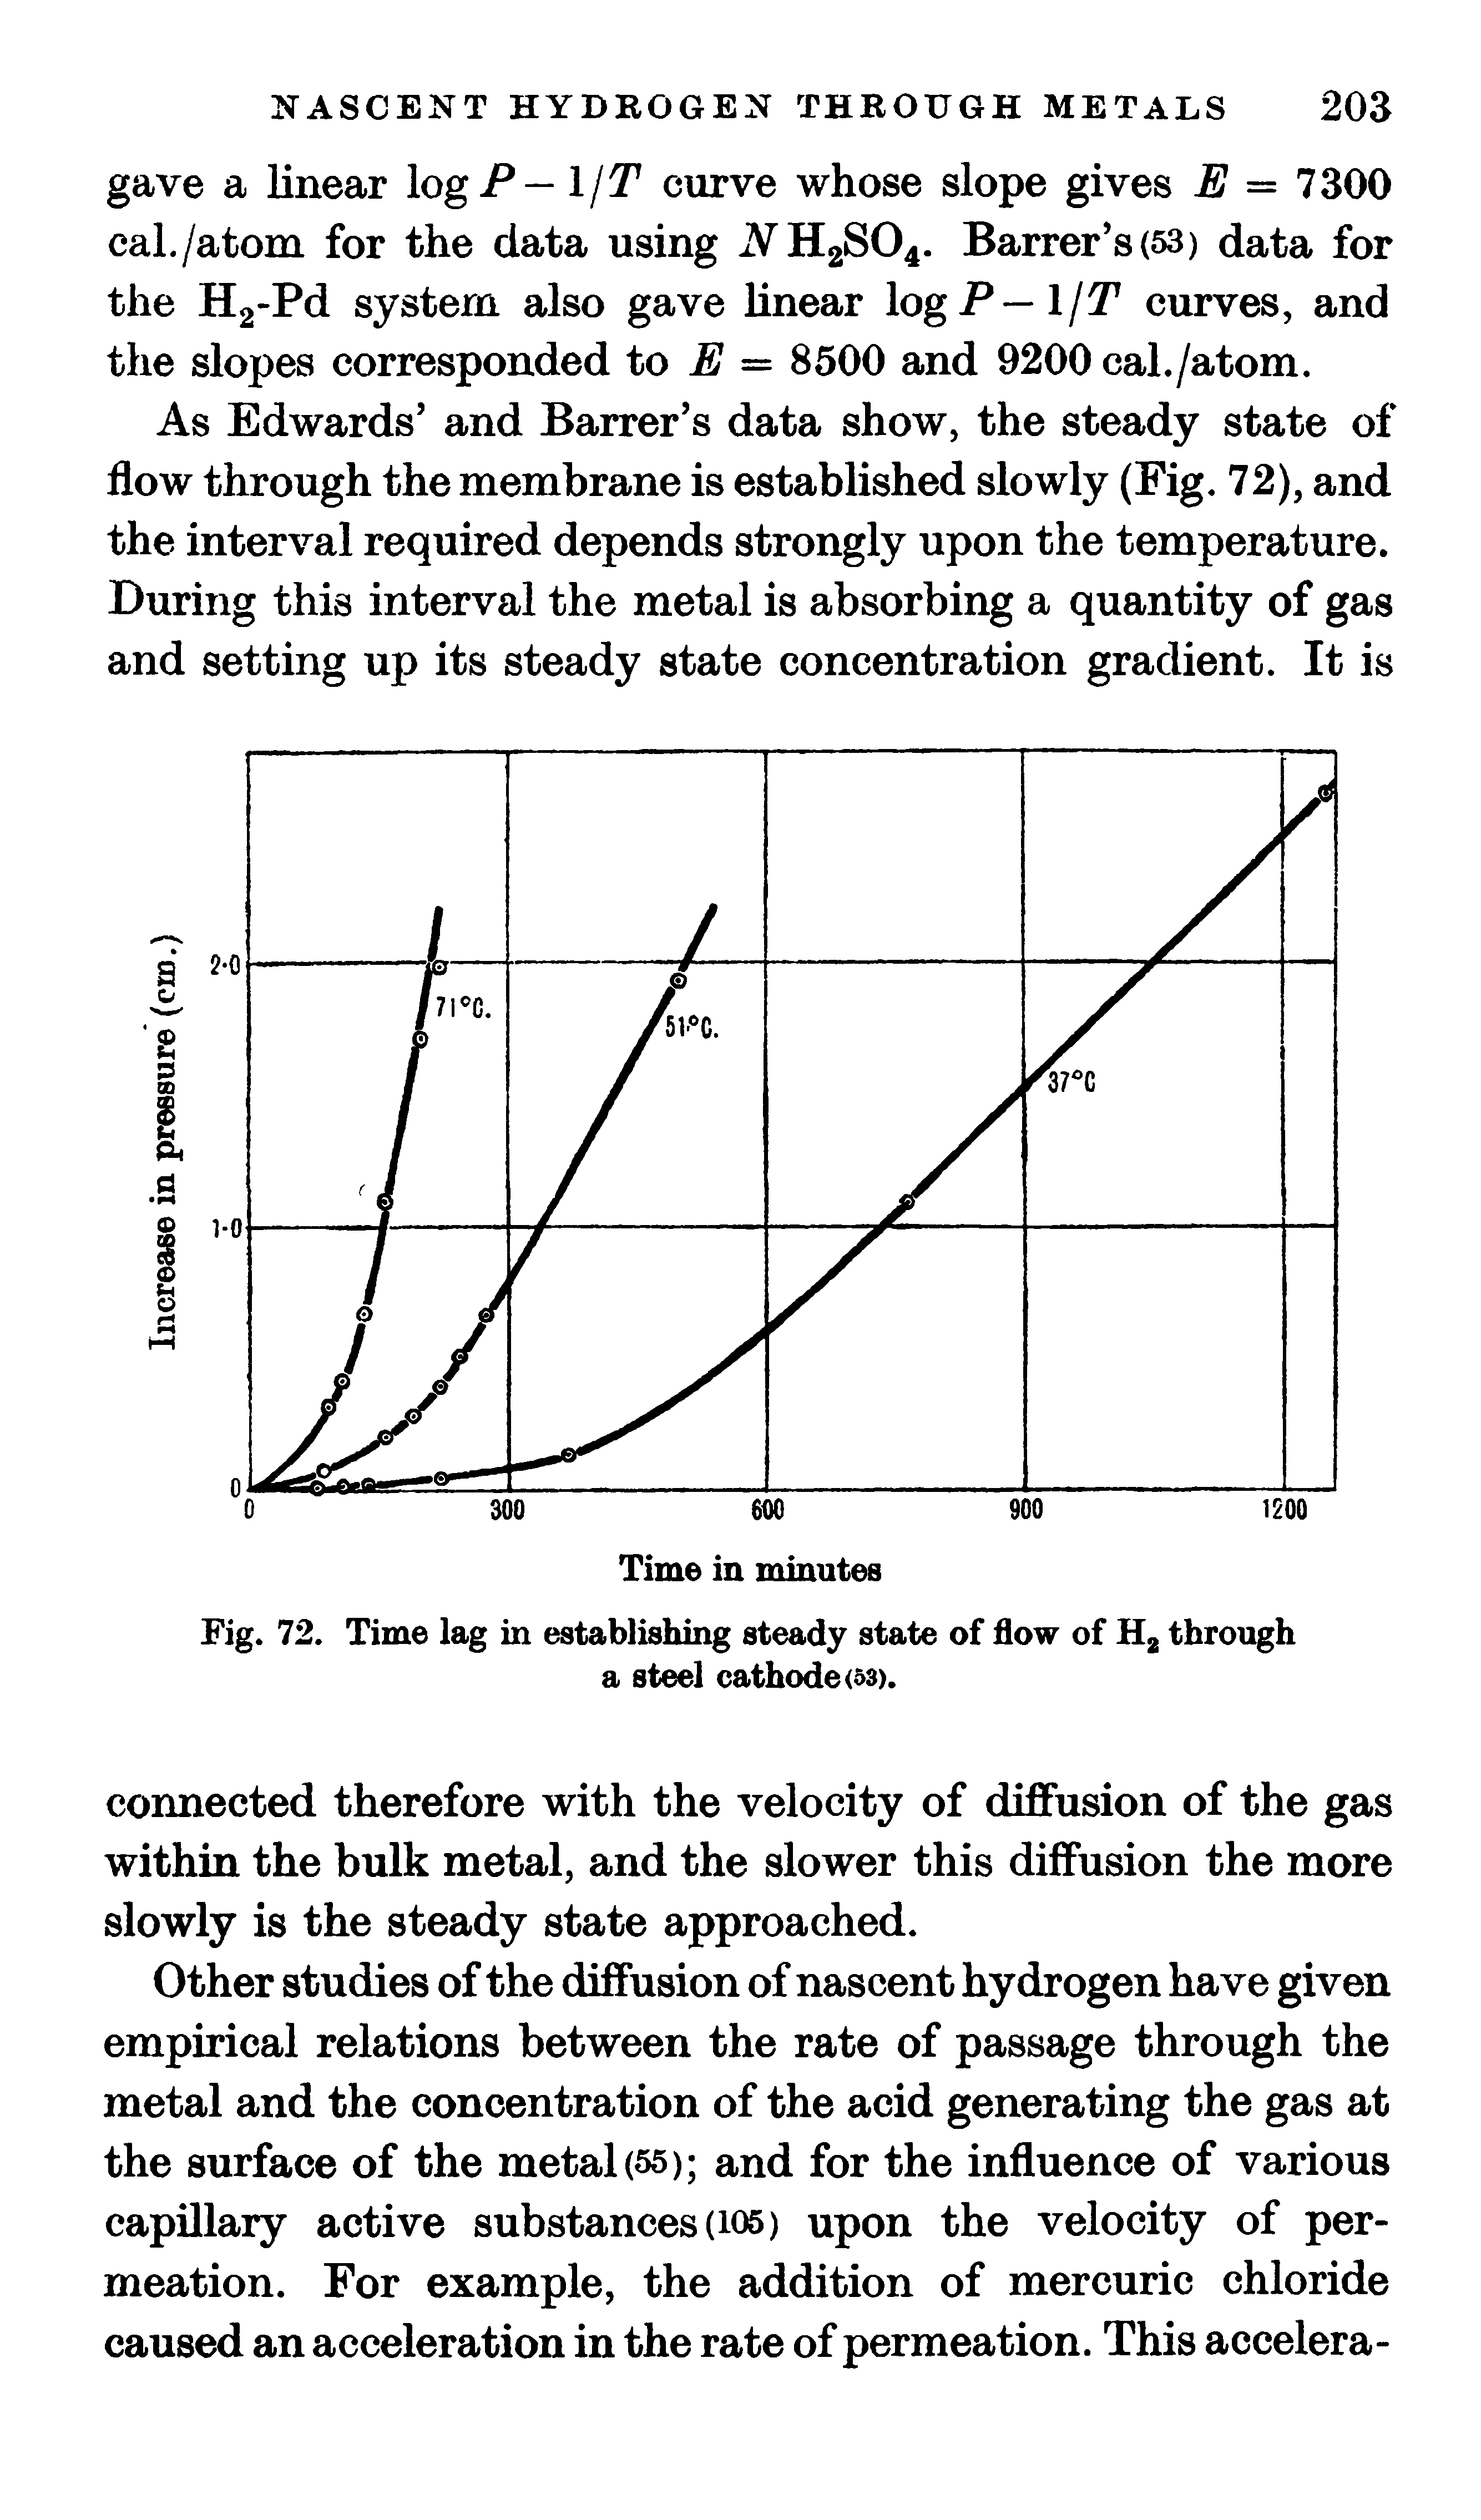 Fig. 72. Time lag in establishing steady state of flow of H2 through a steel cathode <53).